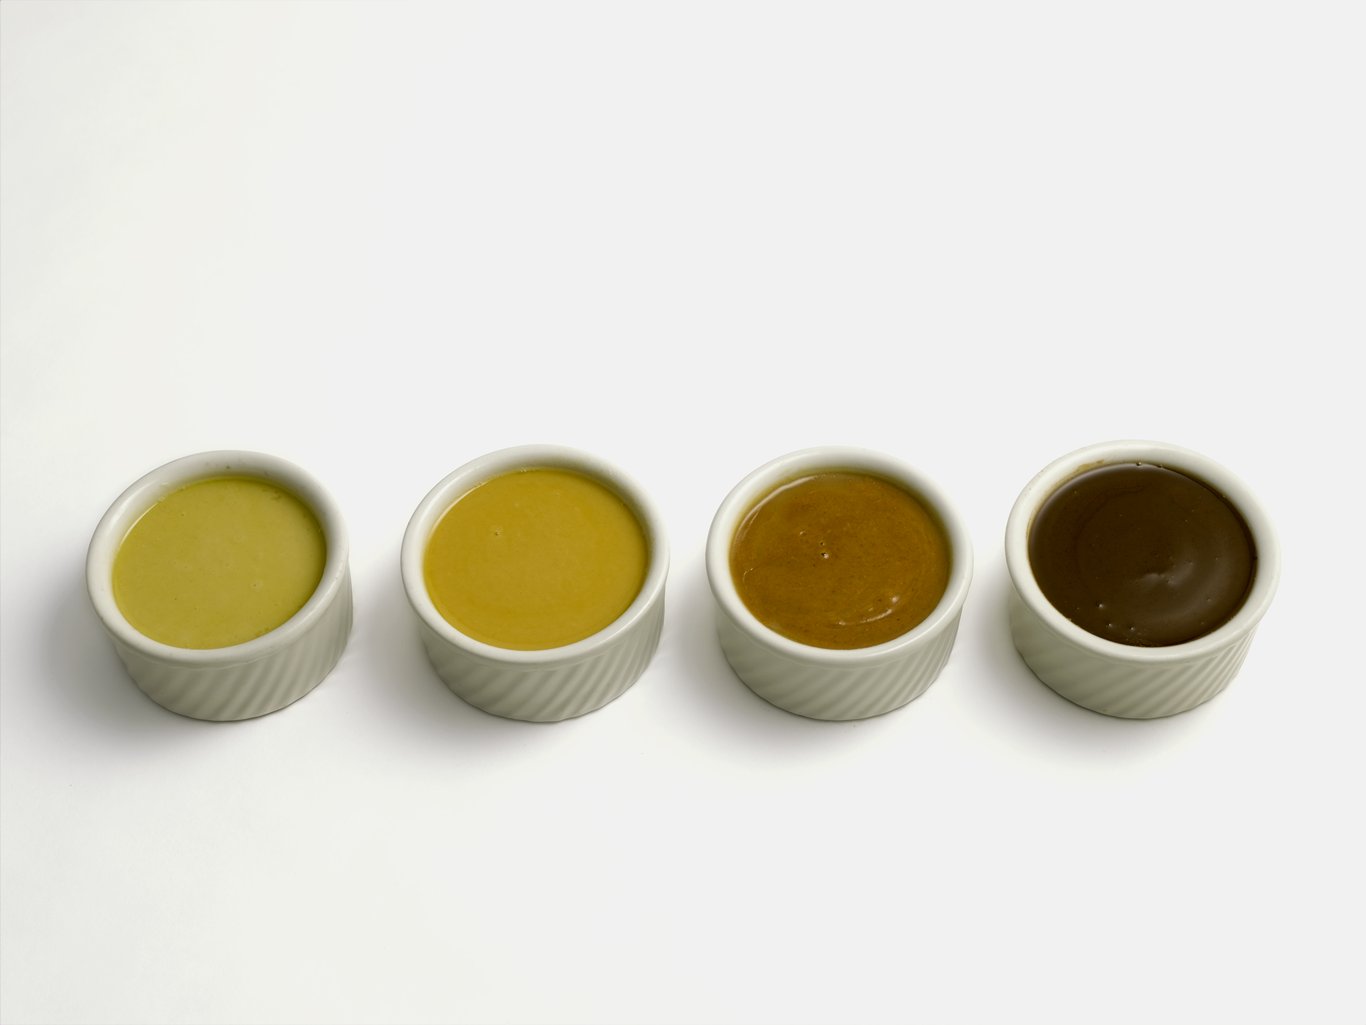 Roux (from left to right): white, blond, brown, dark.  Roux is an appareil containing equal parts of flour and fat (usually butter) used to thicken liquids.